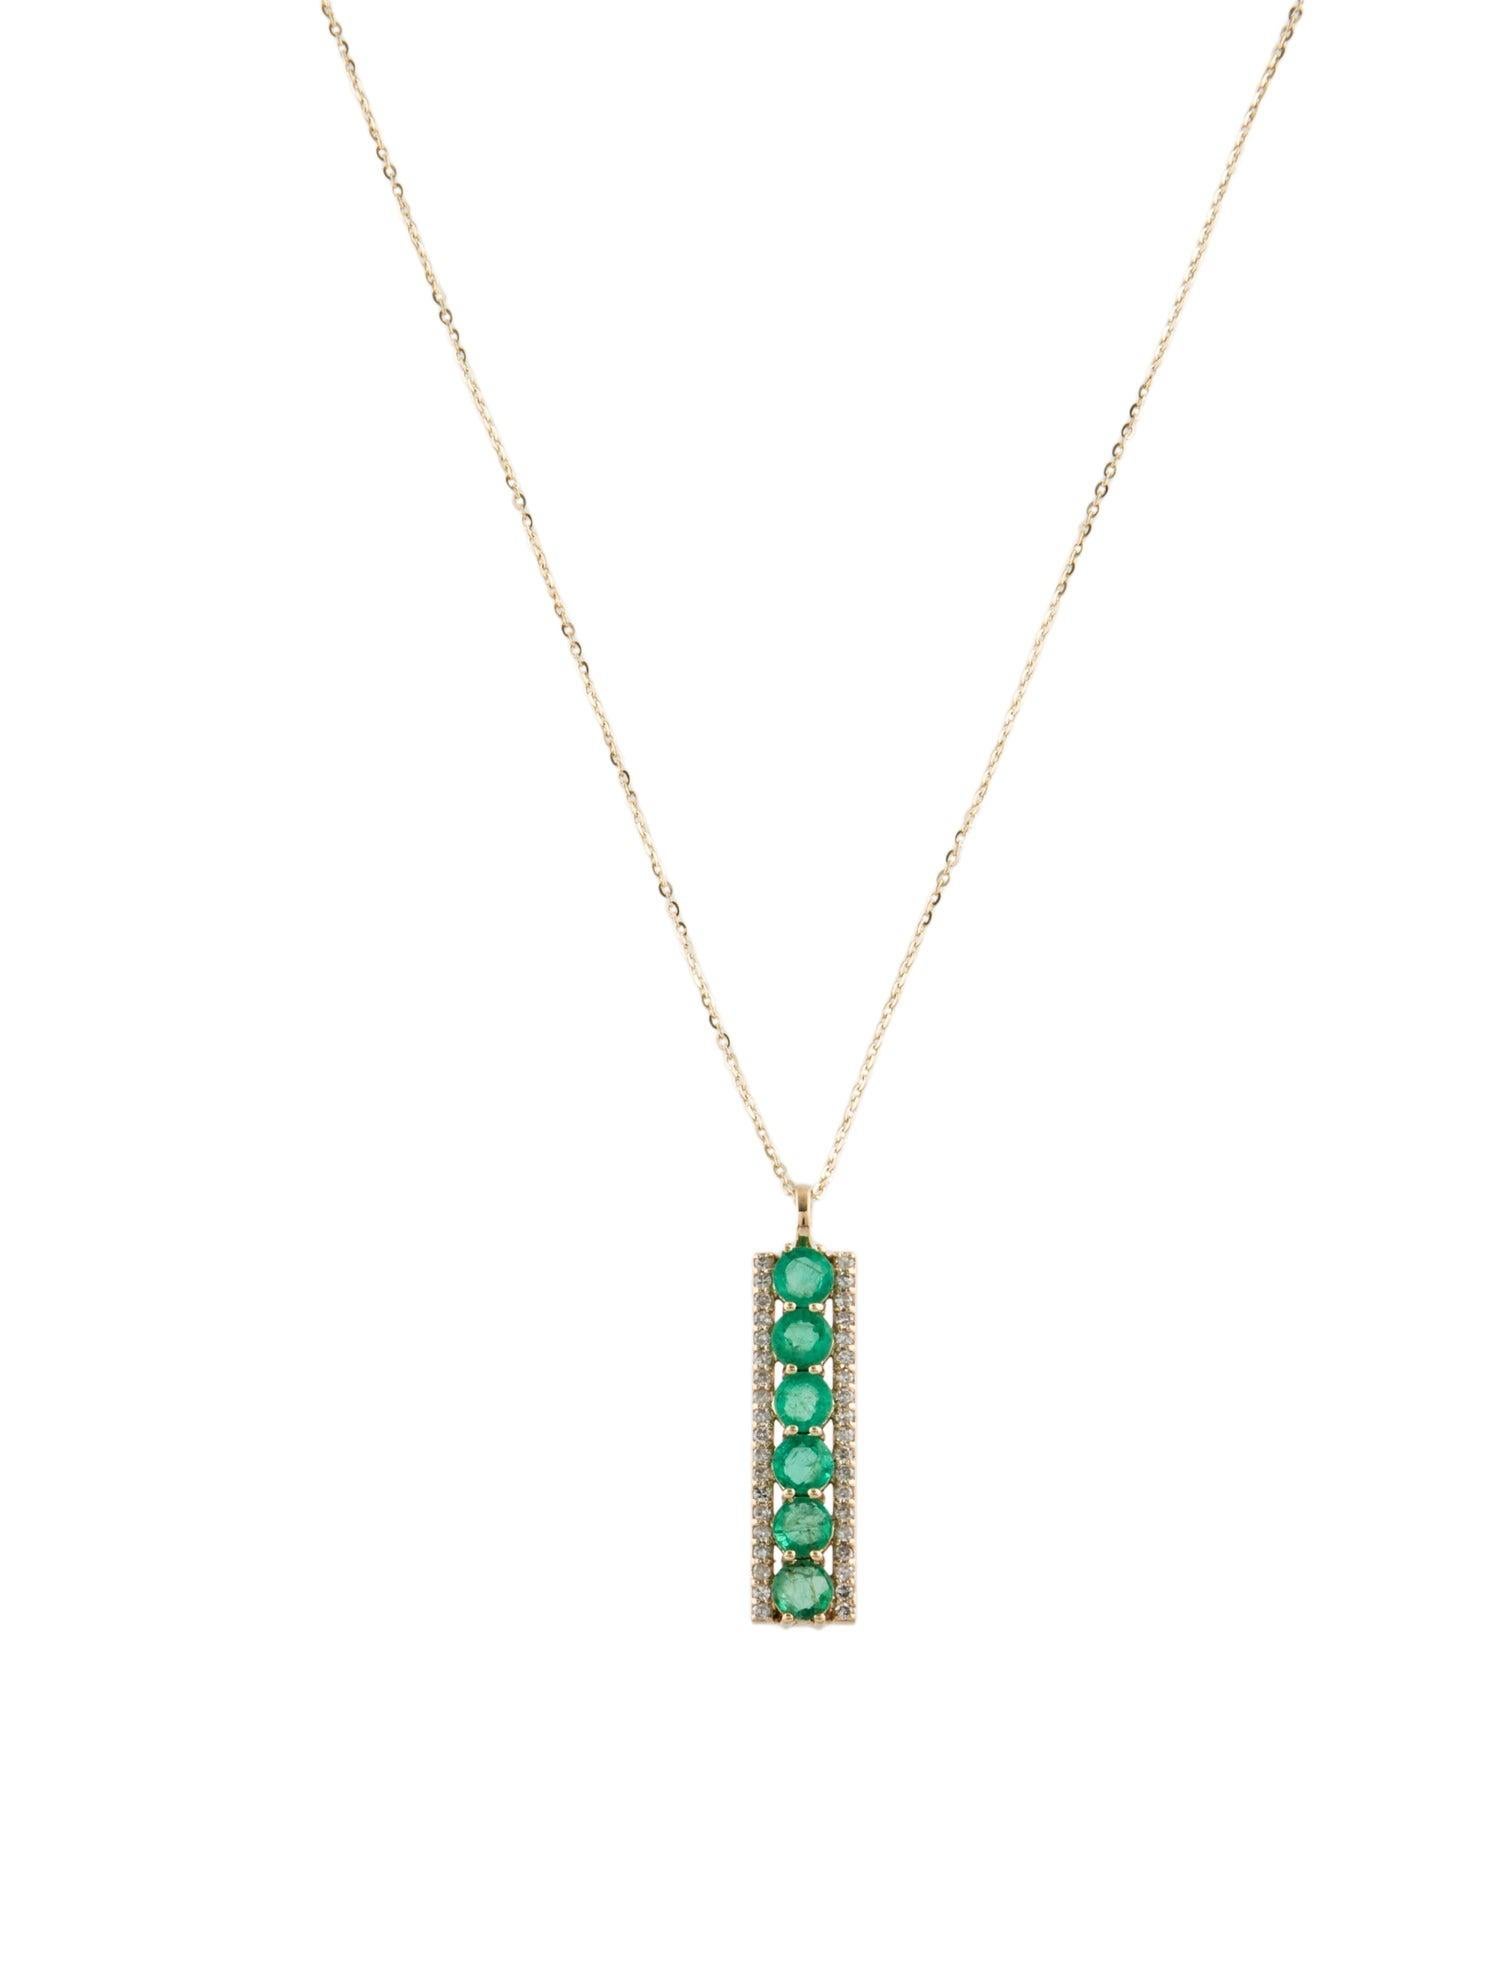 14K 1.45ctw Emerald & Diamond Pendant Necklace: Exquisite Statement Jewelry In New Condition For Sale In Holtsville, NY